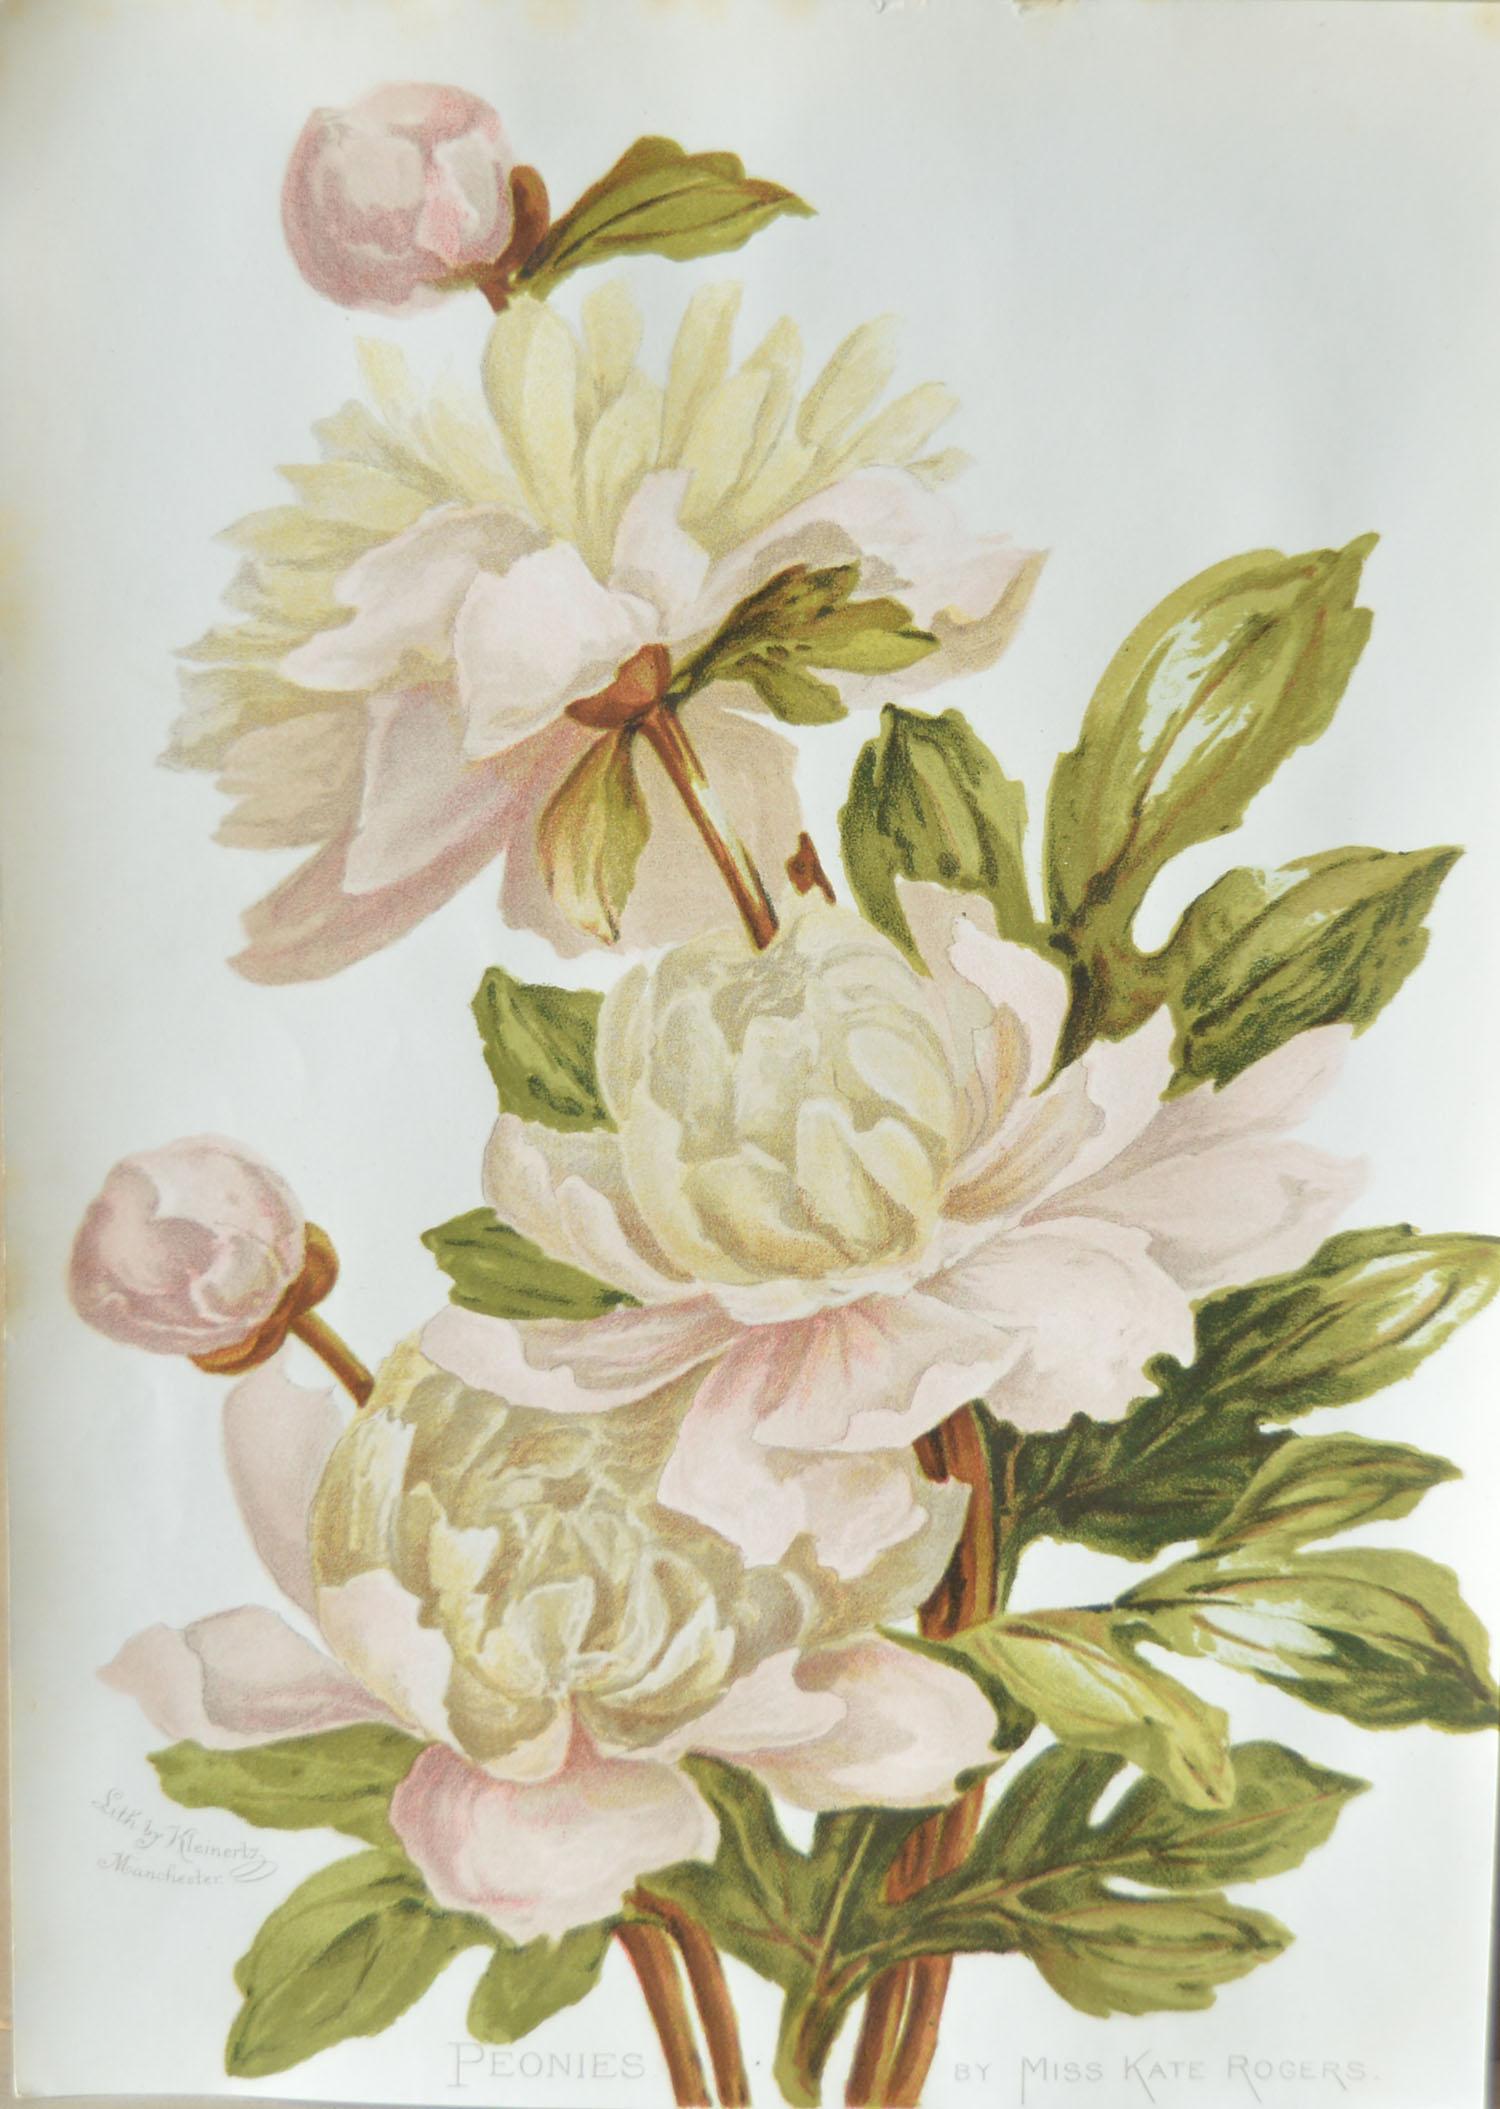 Fabulous set of 8 botanical prints.

Studies include peonies, apple blossom, American sunflower, hollyhocks, chrysanthemum, sunflower, bramble and orange lily.

Lithographs by Kleinertz, Manchester.

Original color.

Unframed.

Published